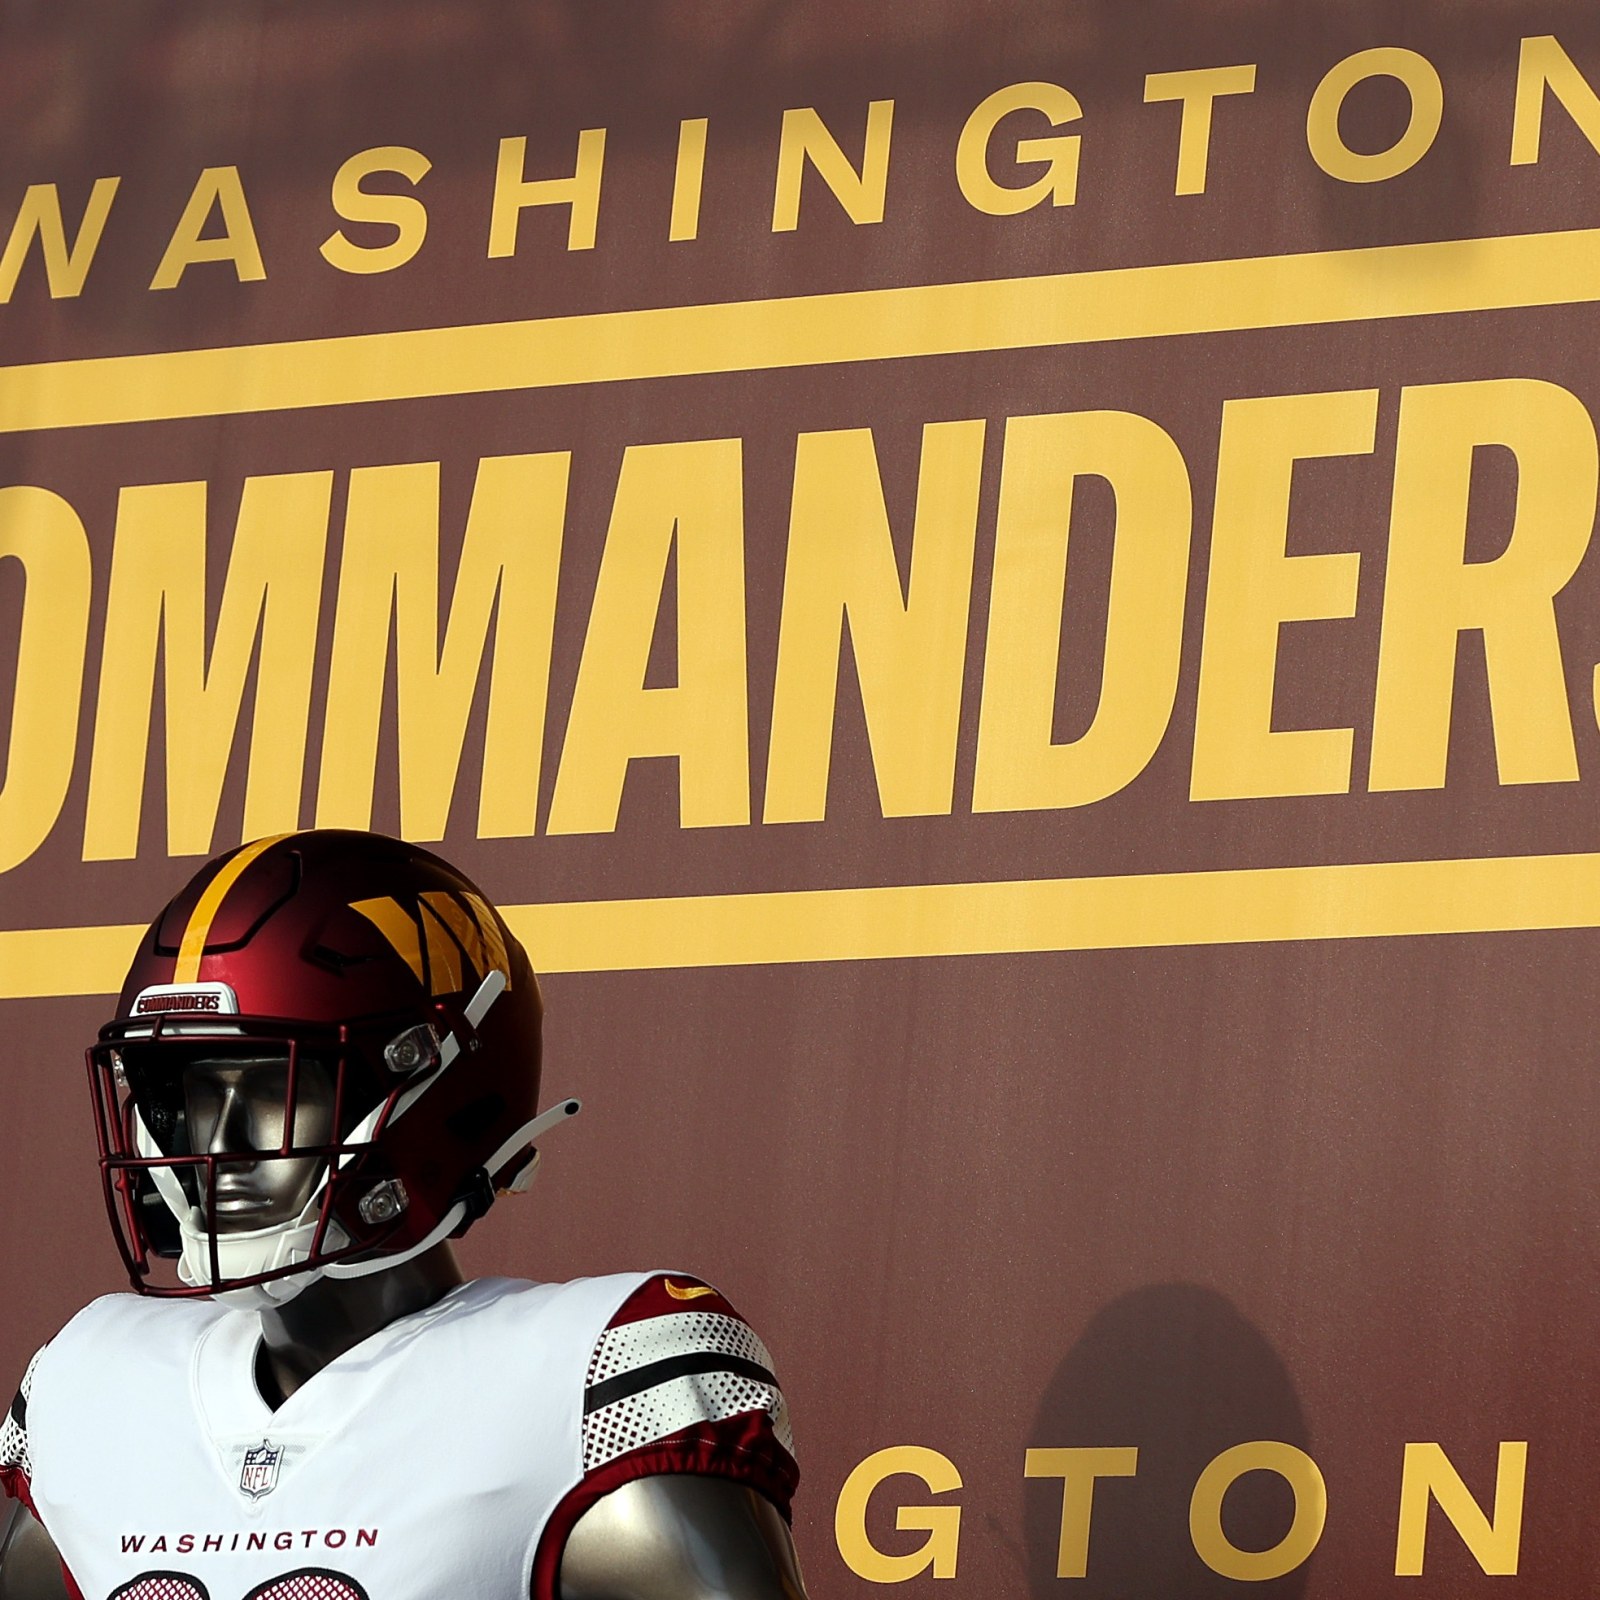 Washington Commanders Name Confirmed and People Hate It